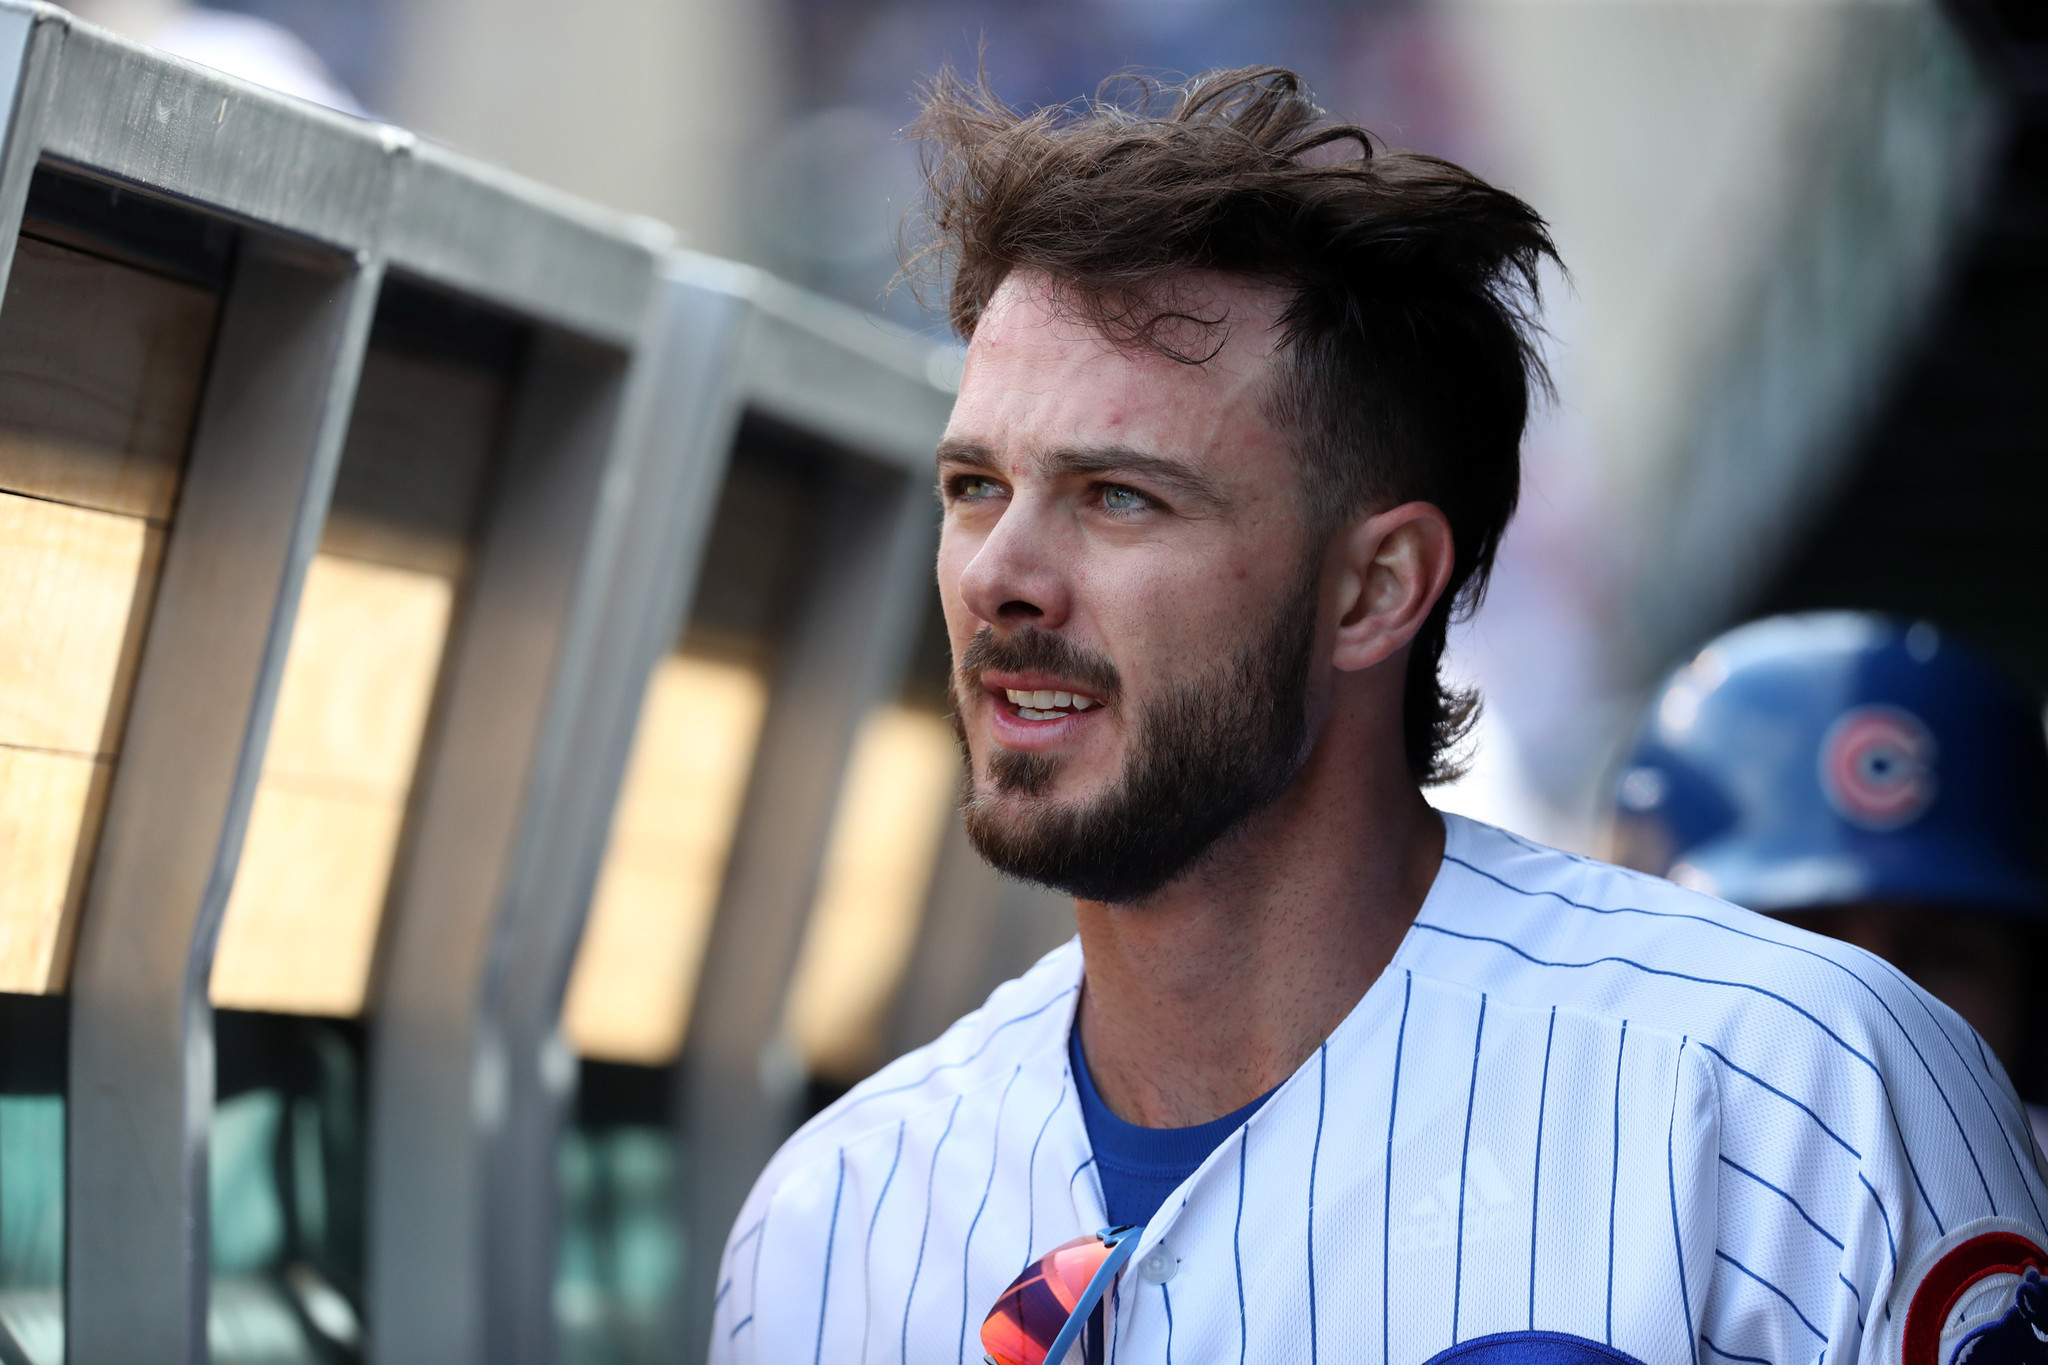 Chicago Cubs player Kris Bryant and wife Jessica announce birth of